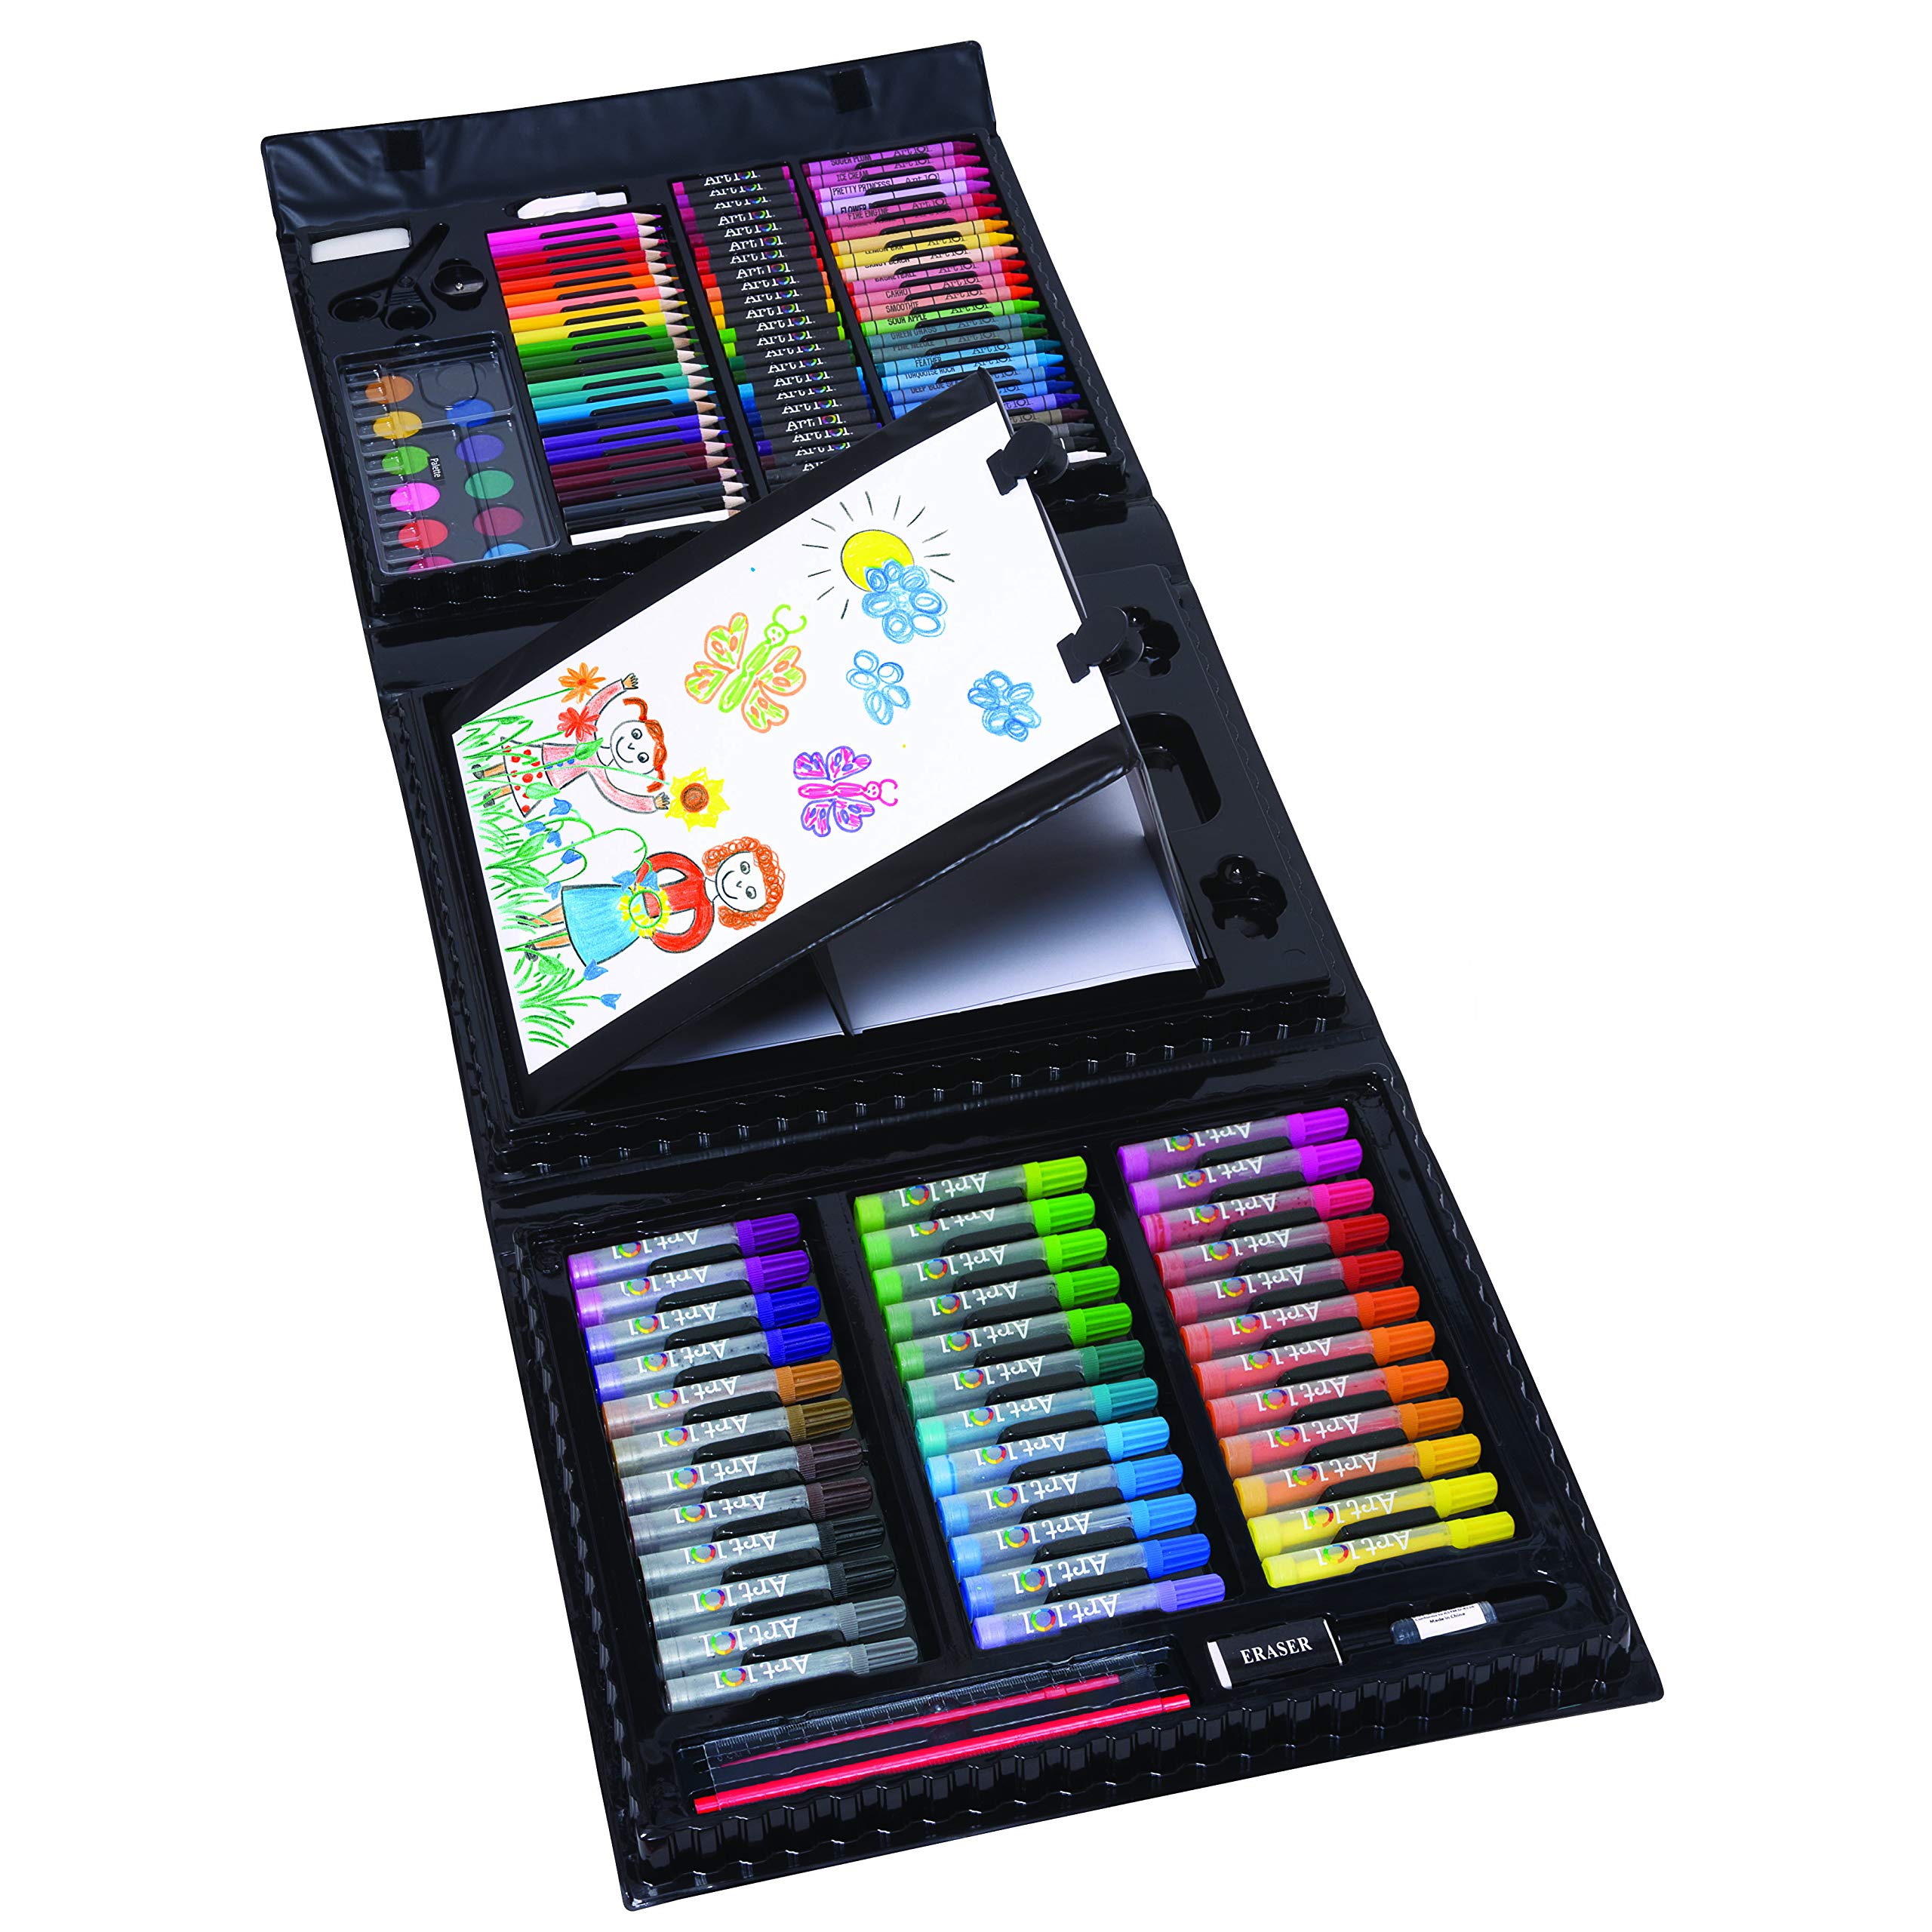 Book Cover Art 101 USA Budding Artist 154 Pc Junior Artist Trifold Easel Set, Includes markers, crayons, oil pastels, watercolor paints, and colored pencils, Case, pop up easel, Portable Art Studio , White Trifold Easel Art Set